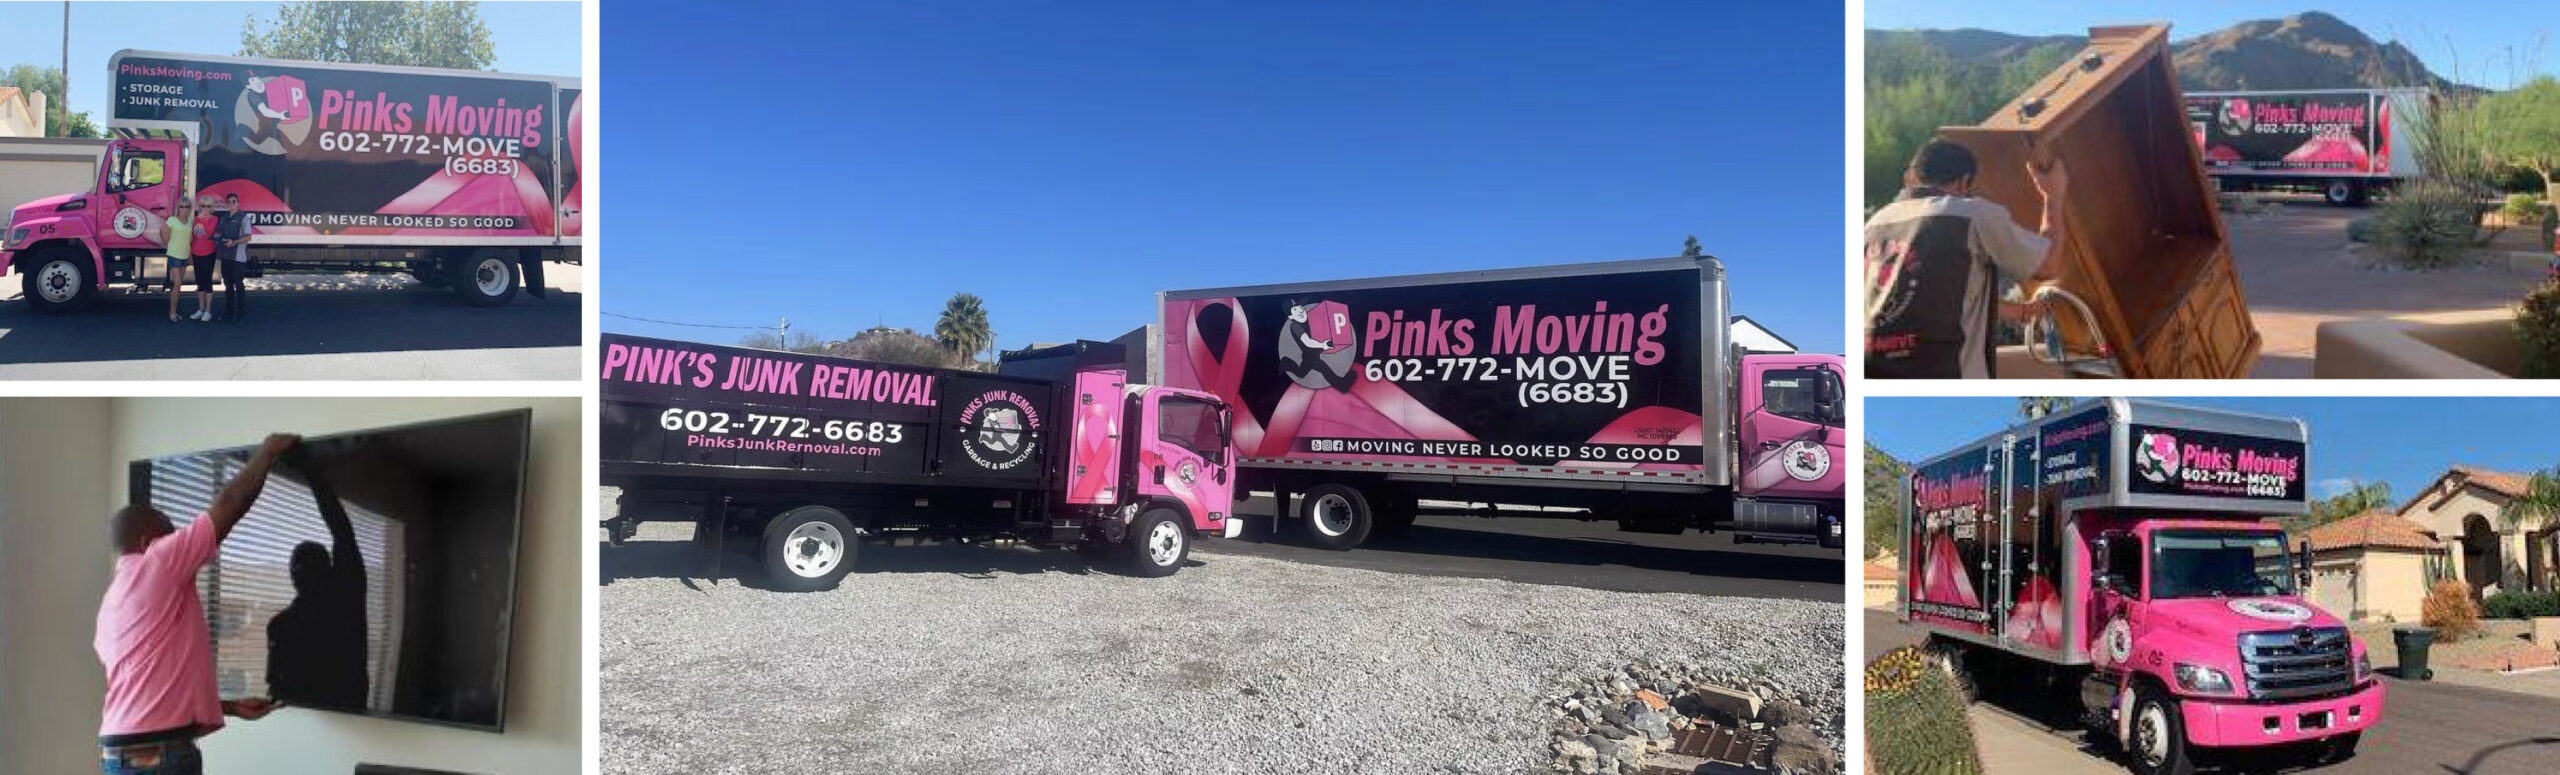 Pinks Moving is one of the best!